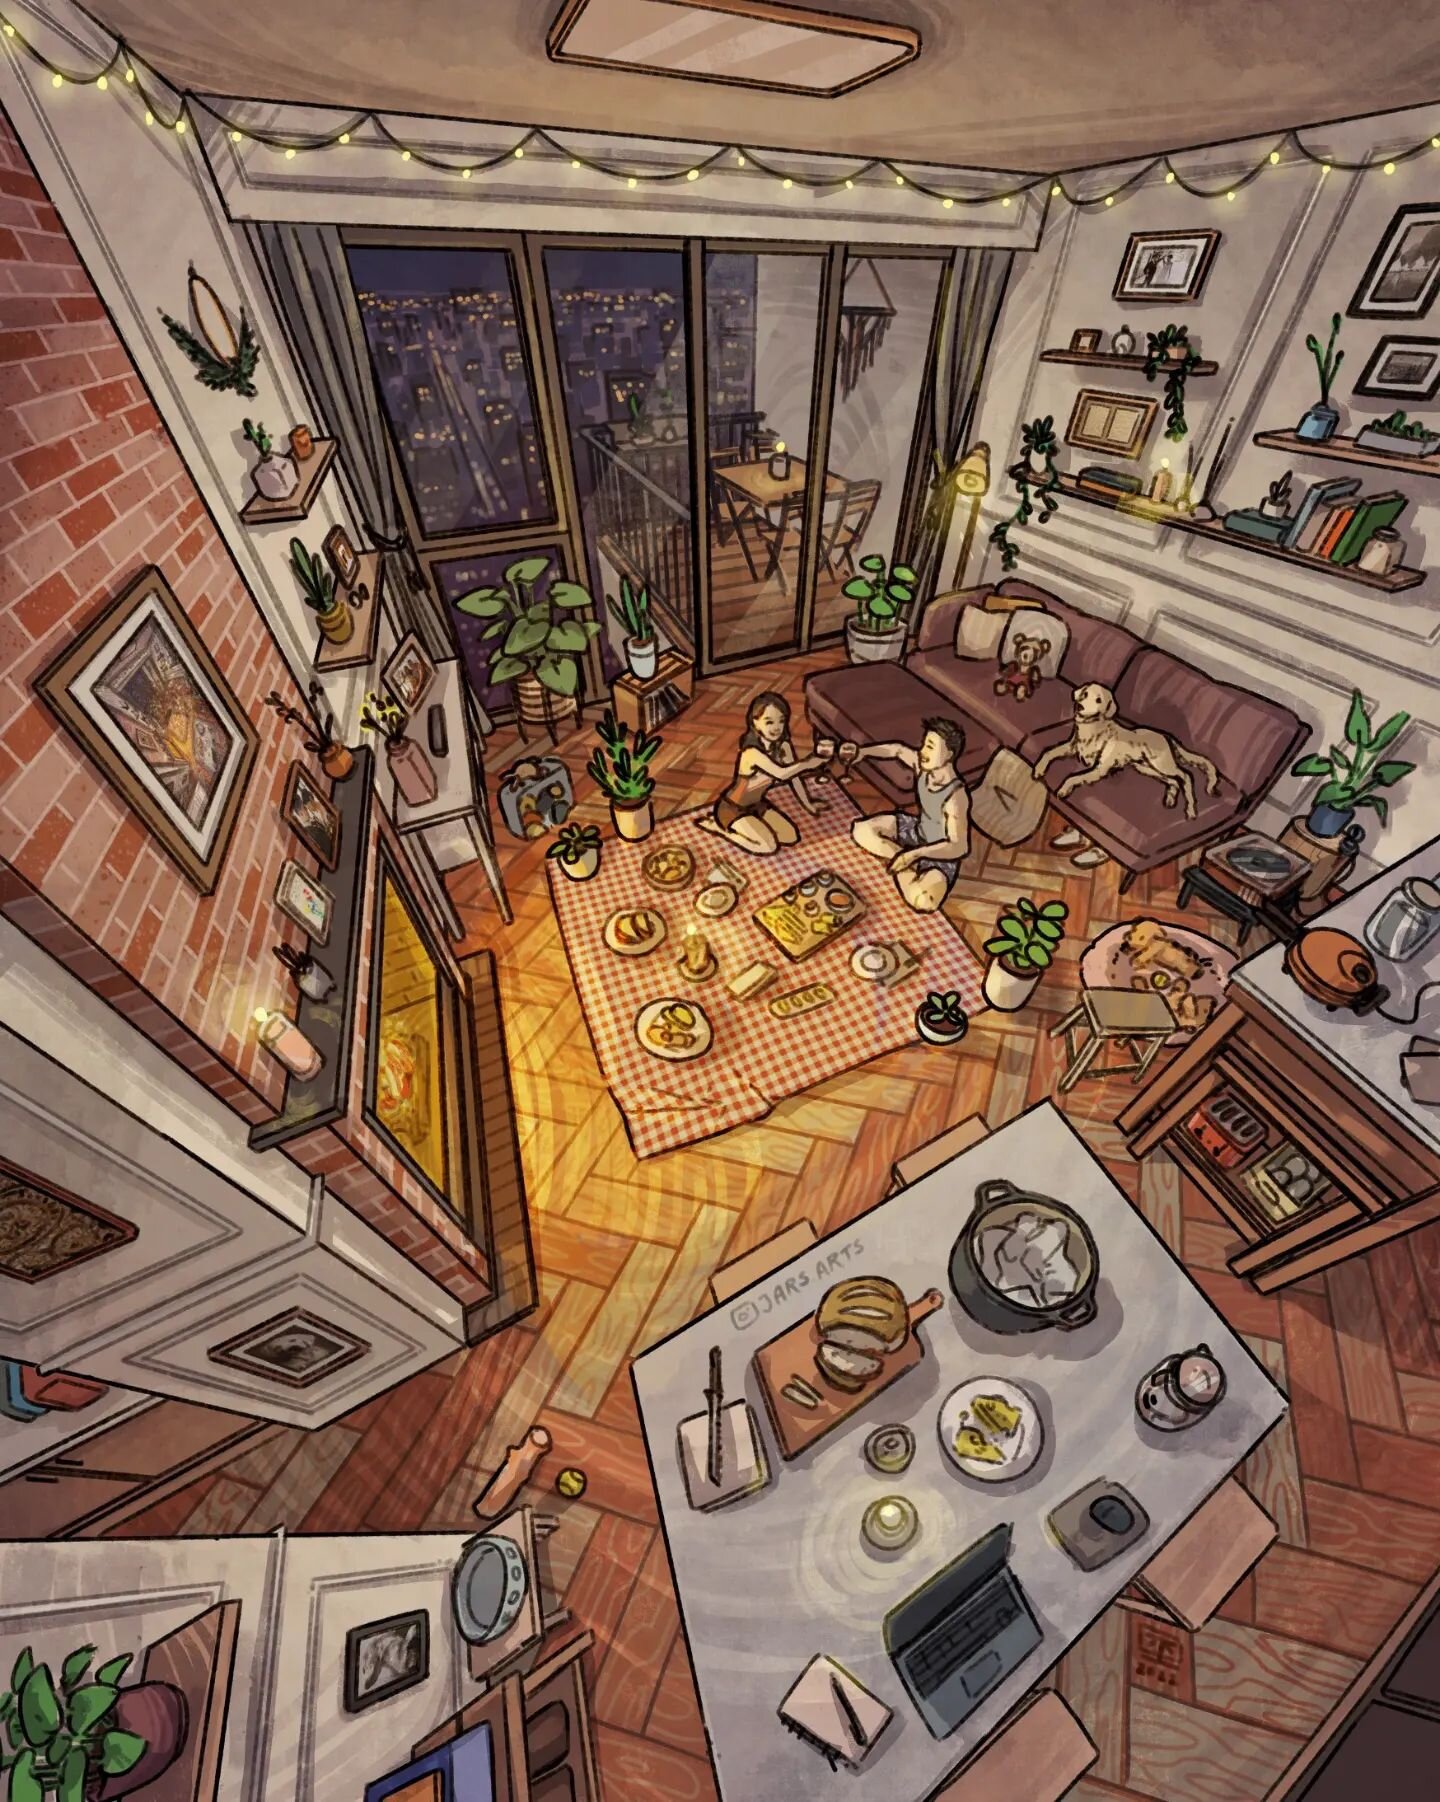 Fireplace Picnic, 2022 ~ A cozy dinner date scene for a commission, featuring dog height framed photos so the good boy can appreciate himself 🐶 The herringbone floor tiling was a refreshing texture change! A struggle to draw in perspective but I thi